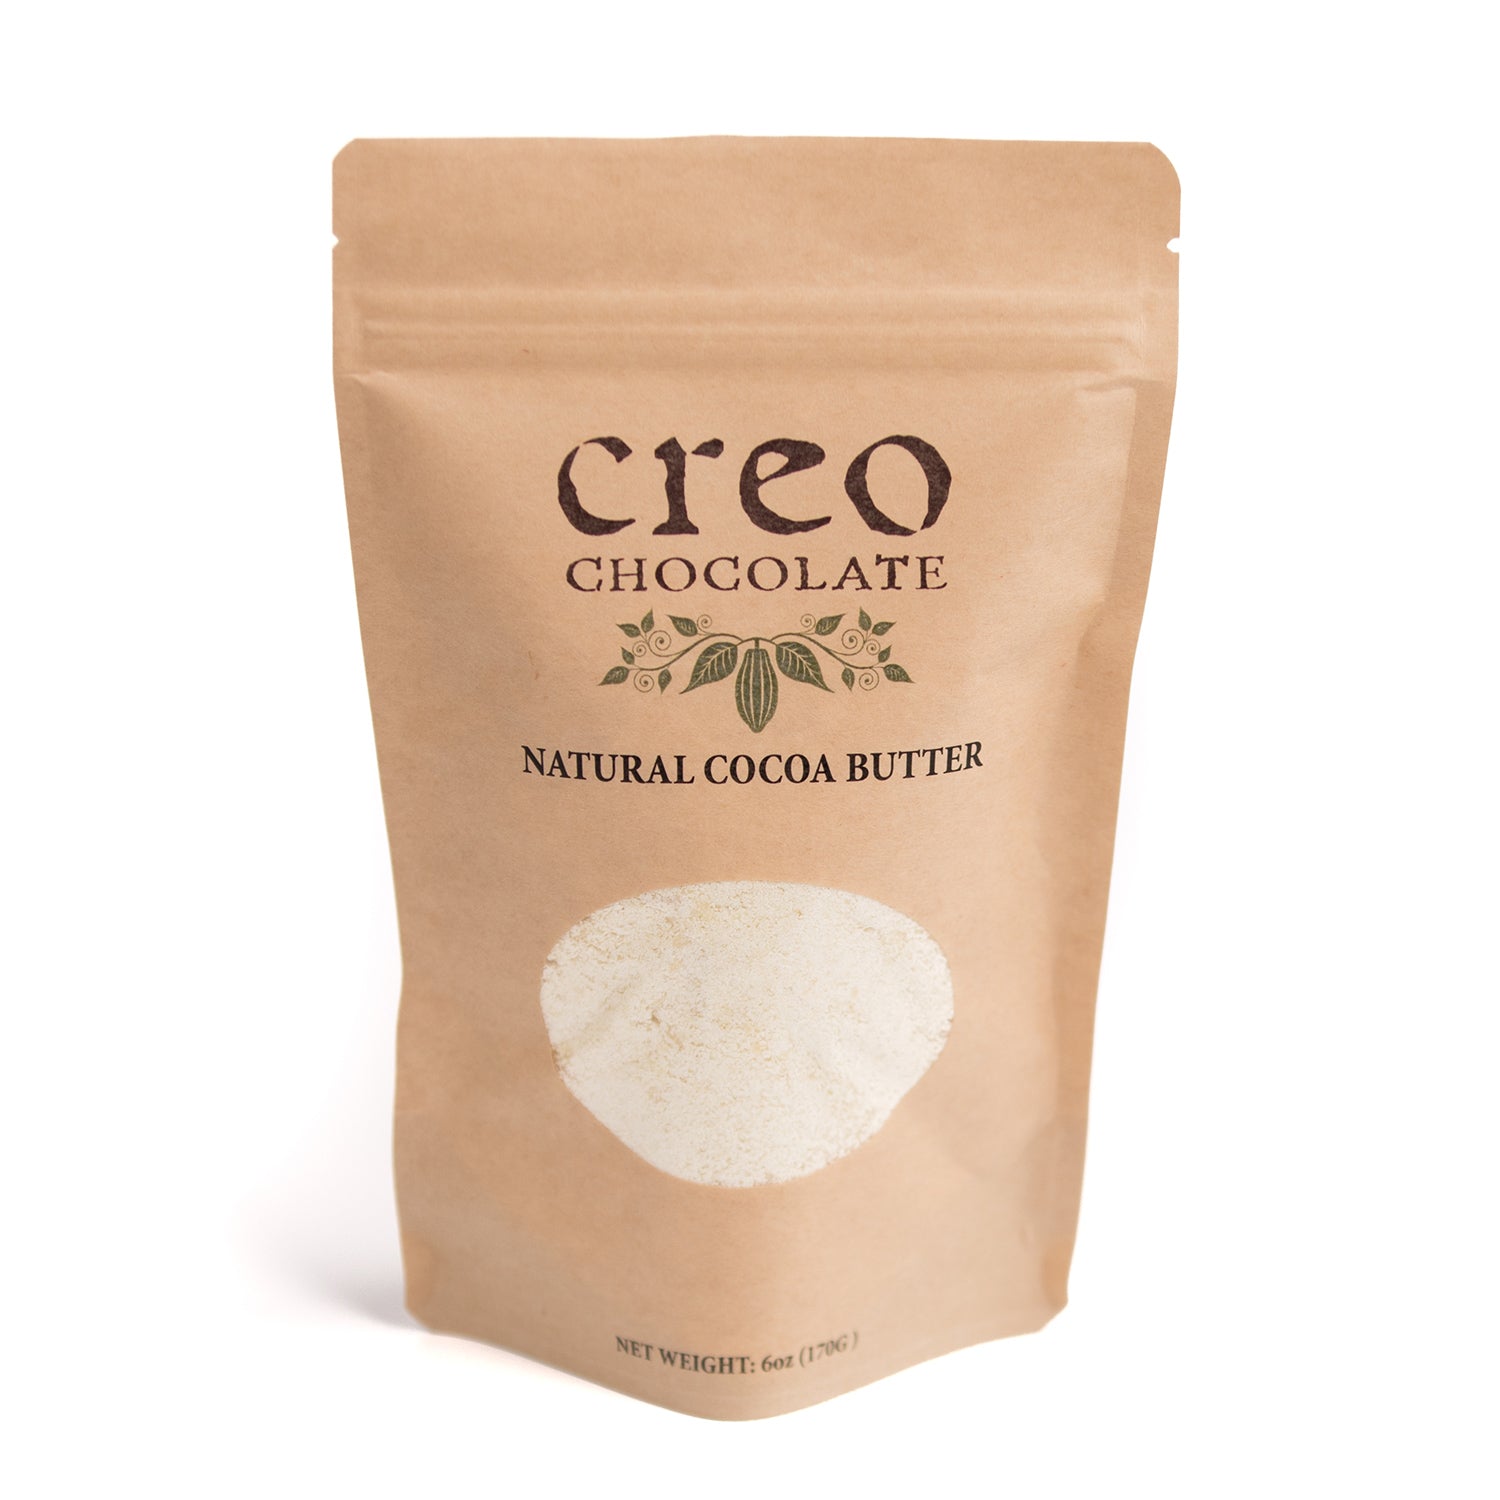 Natural Cocoa Butter - Creo Chocolate